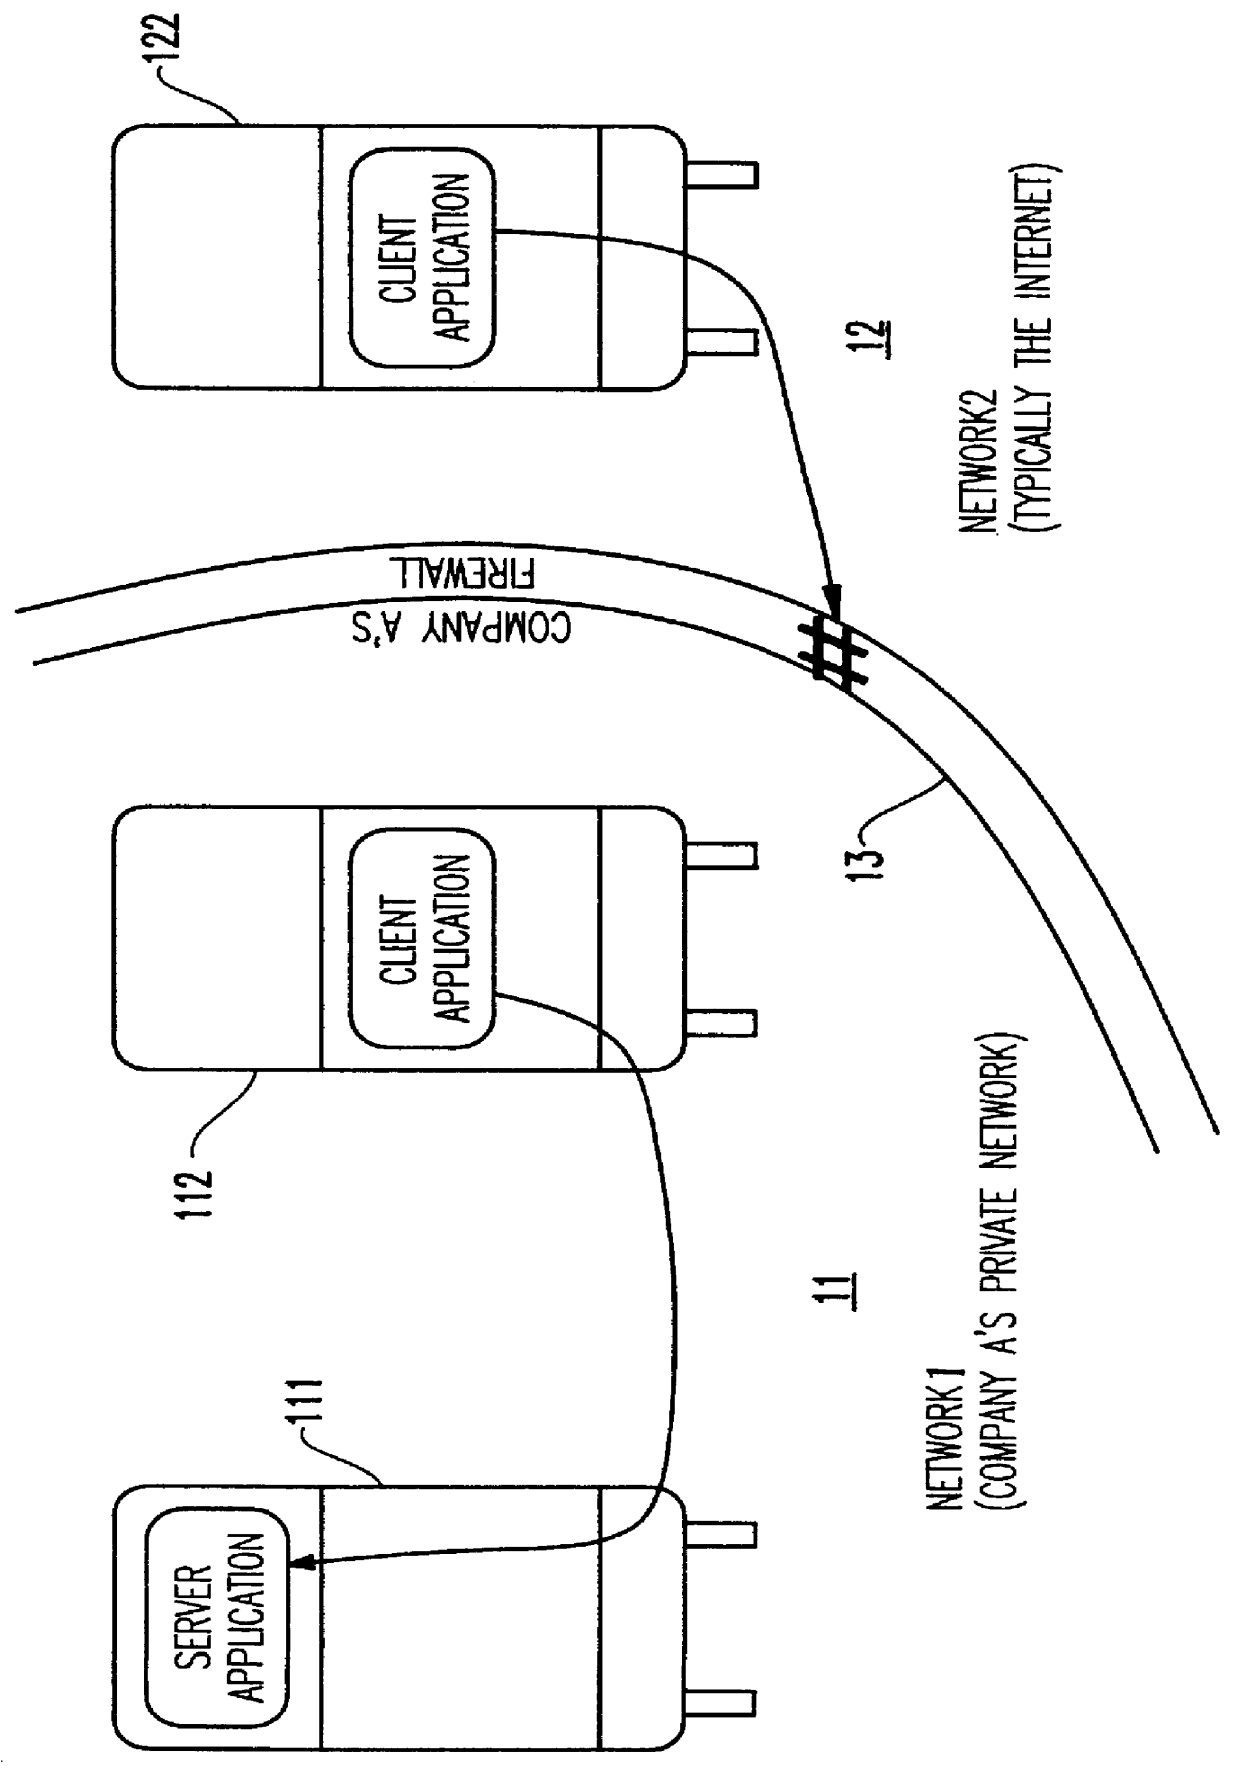 Method and apparatus for lightweight secure communication tunneling over the internet